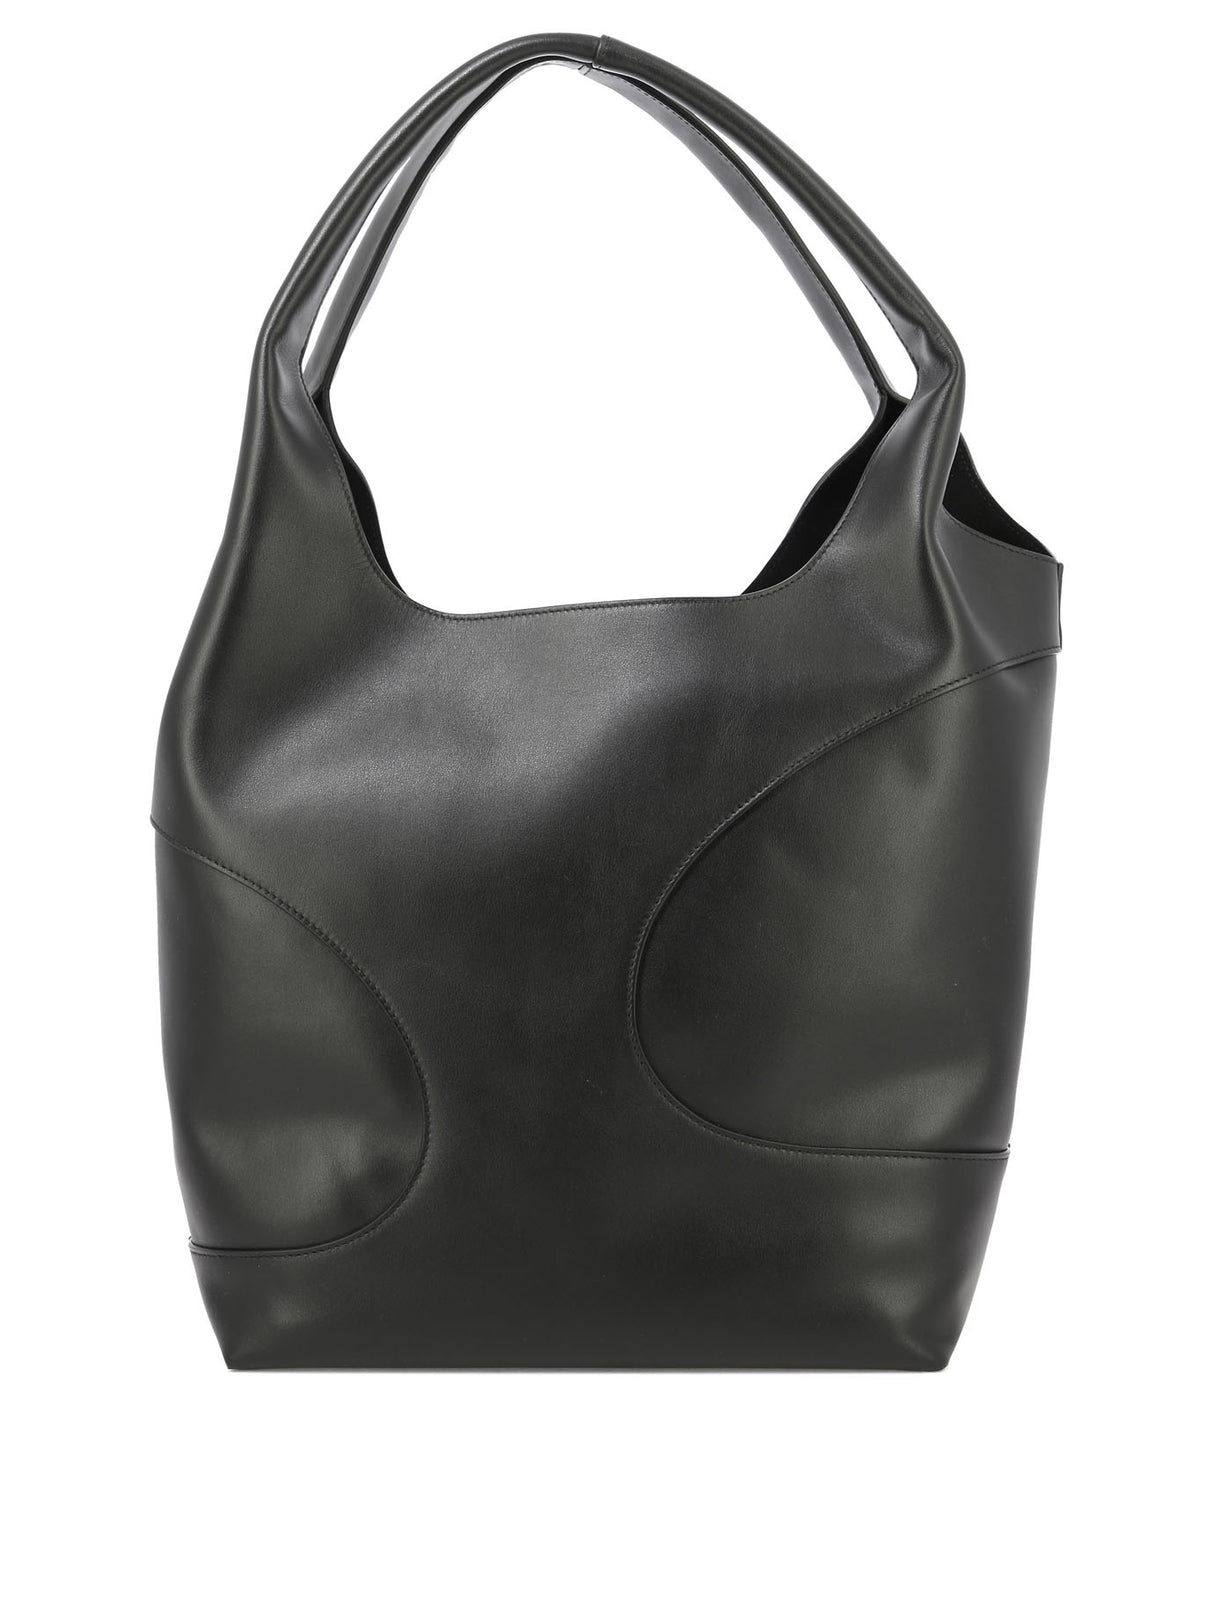 FERRAGAMO Black Cutout Hobo Handbag with Suede Inserts and Removable Pouch for Women